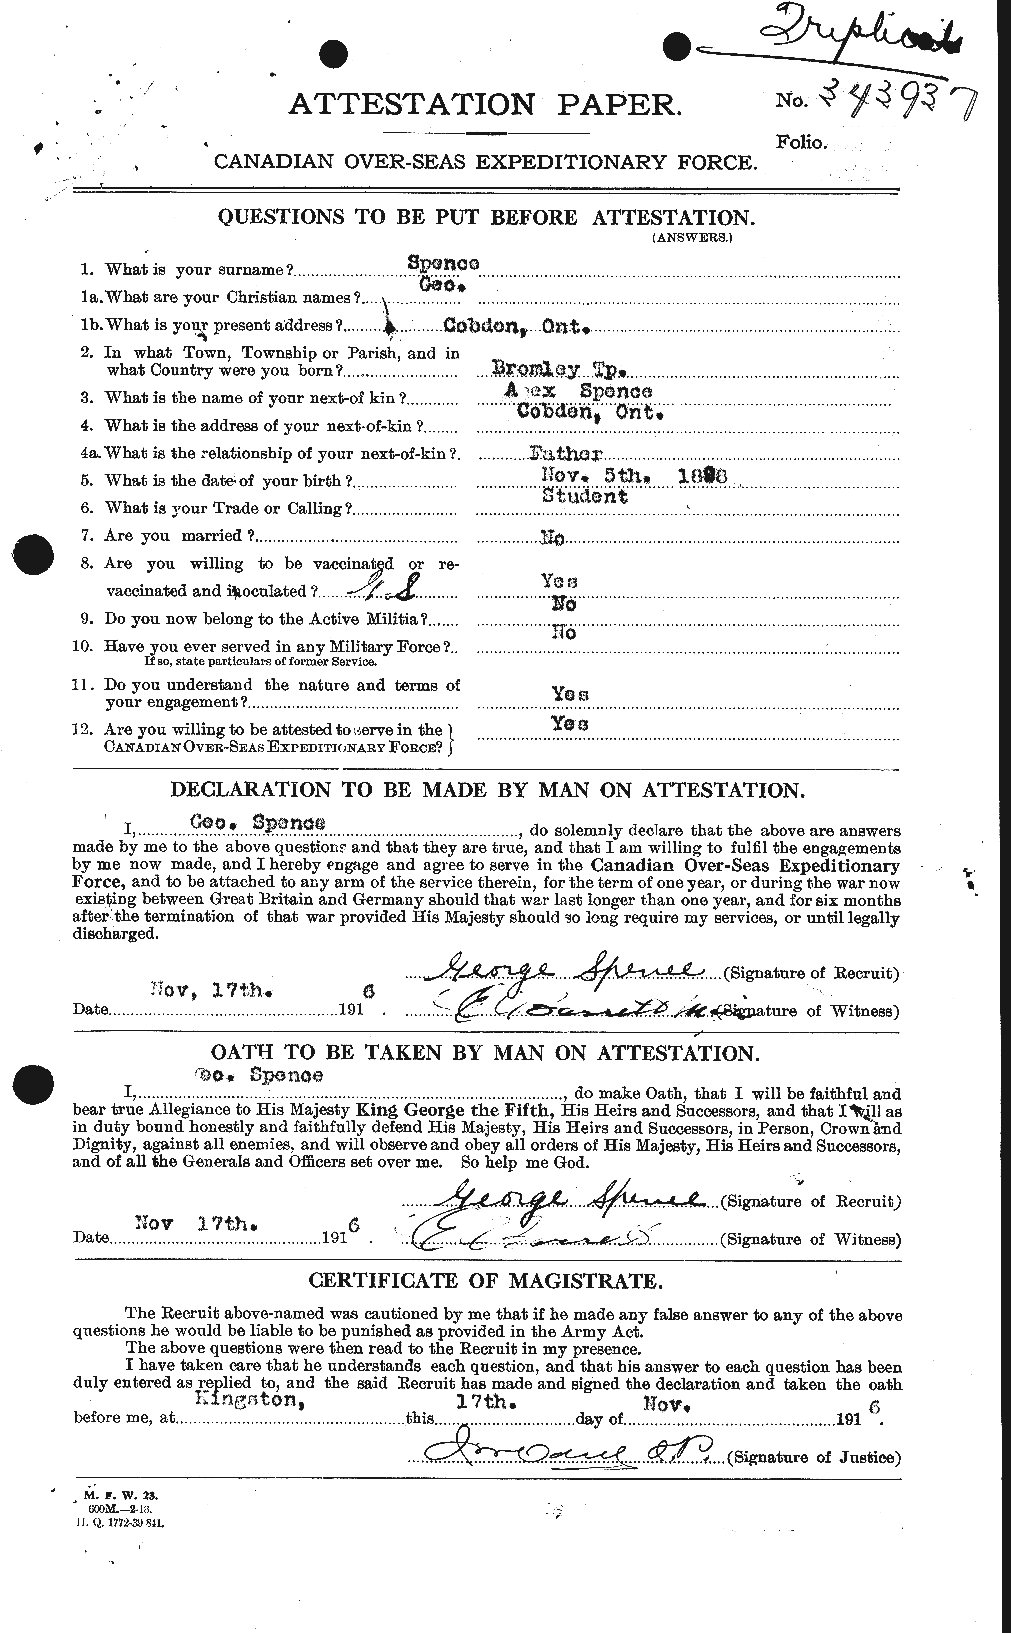 Personnel Records of the First World War - CEF 109524a